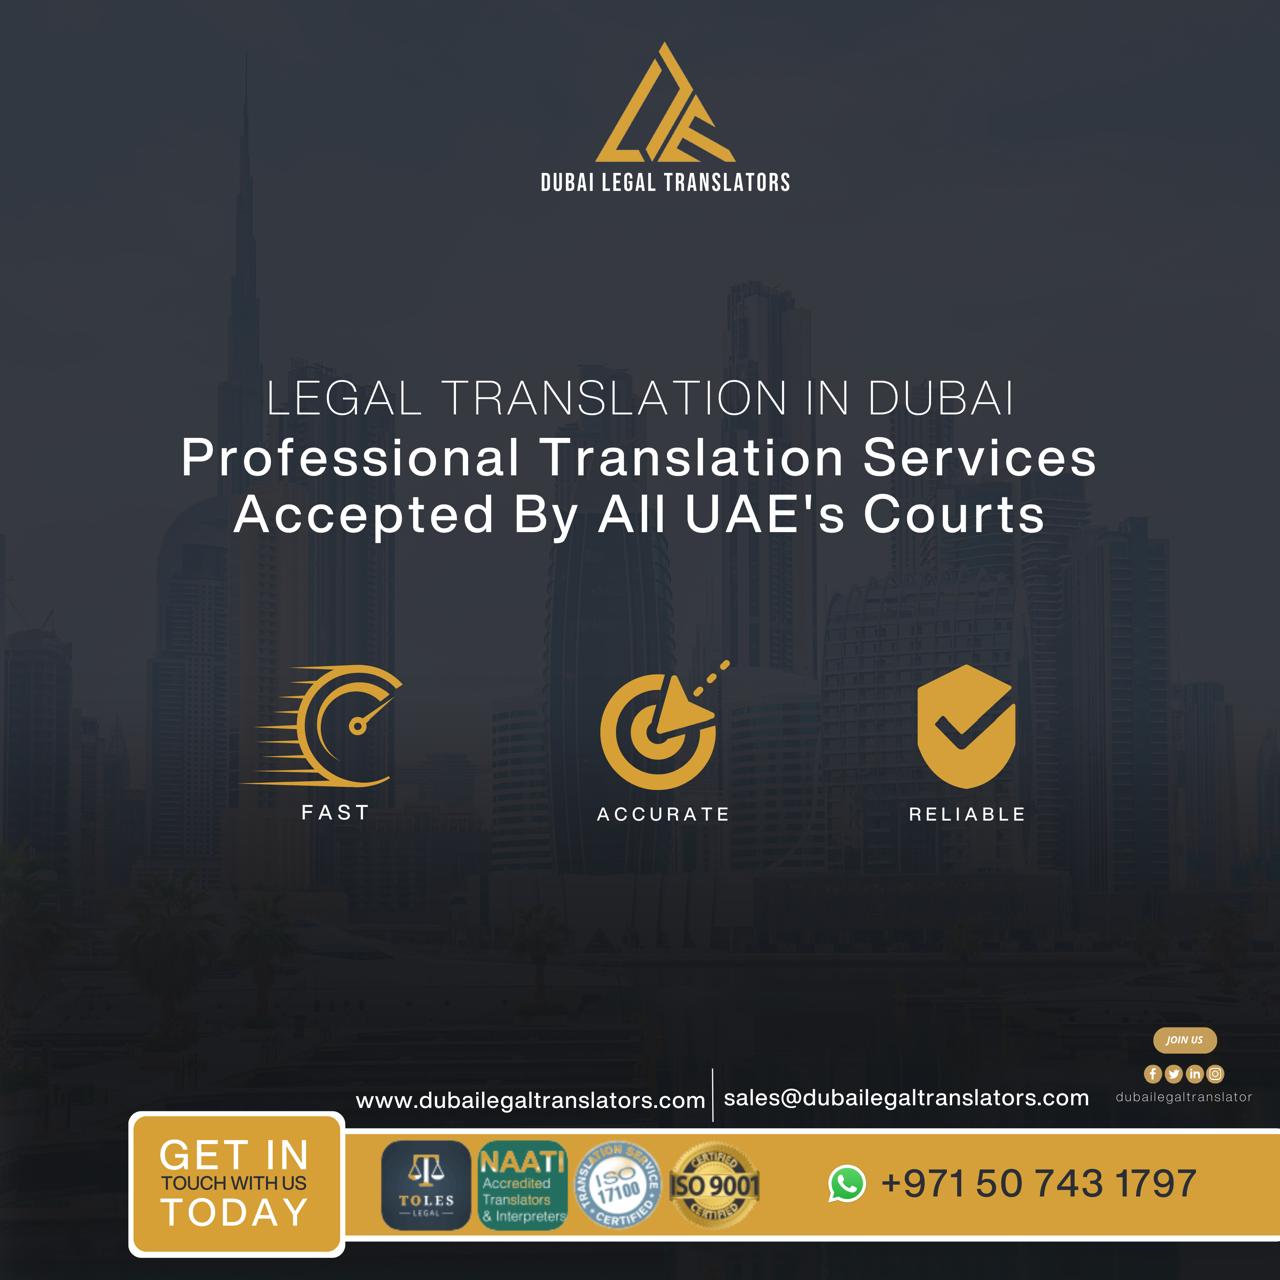 From German documents to English Translation, we’ve got you covered! Our experienced linguists deliver high-quality and culturally appropriate translations for all your communication needs.